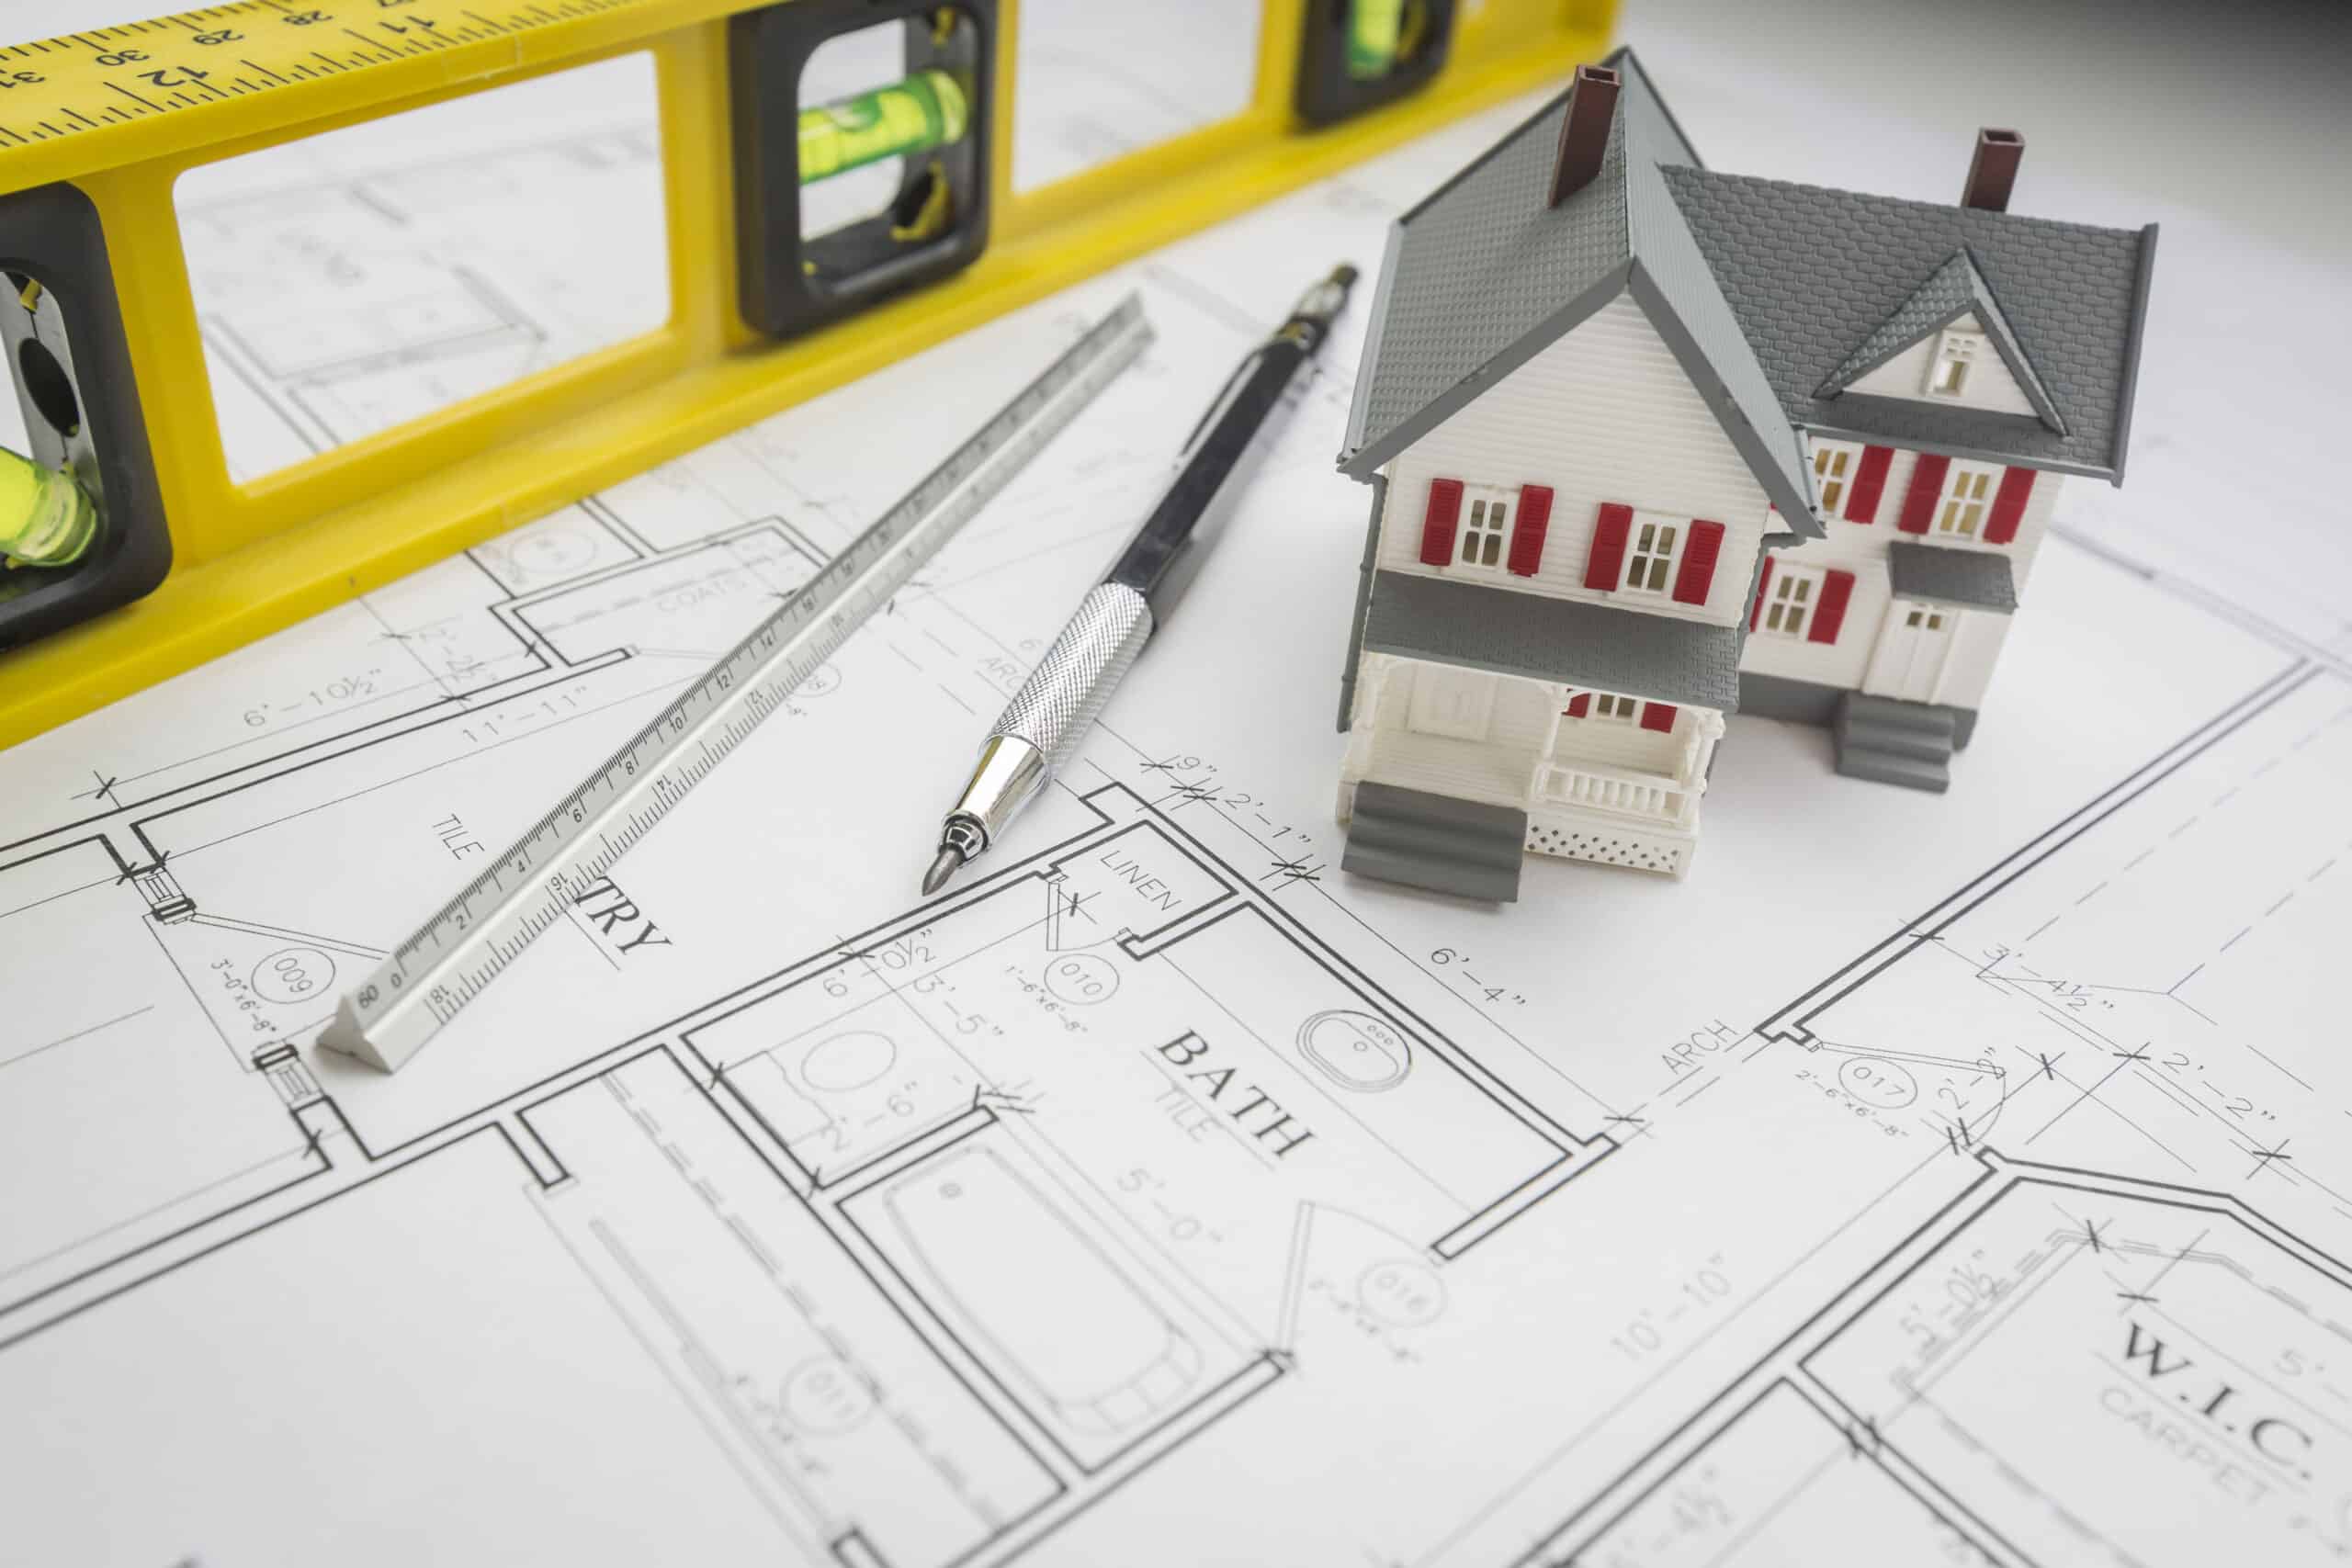 Construction tools and plan for model home building project